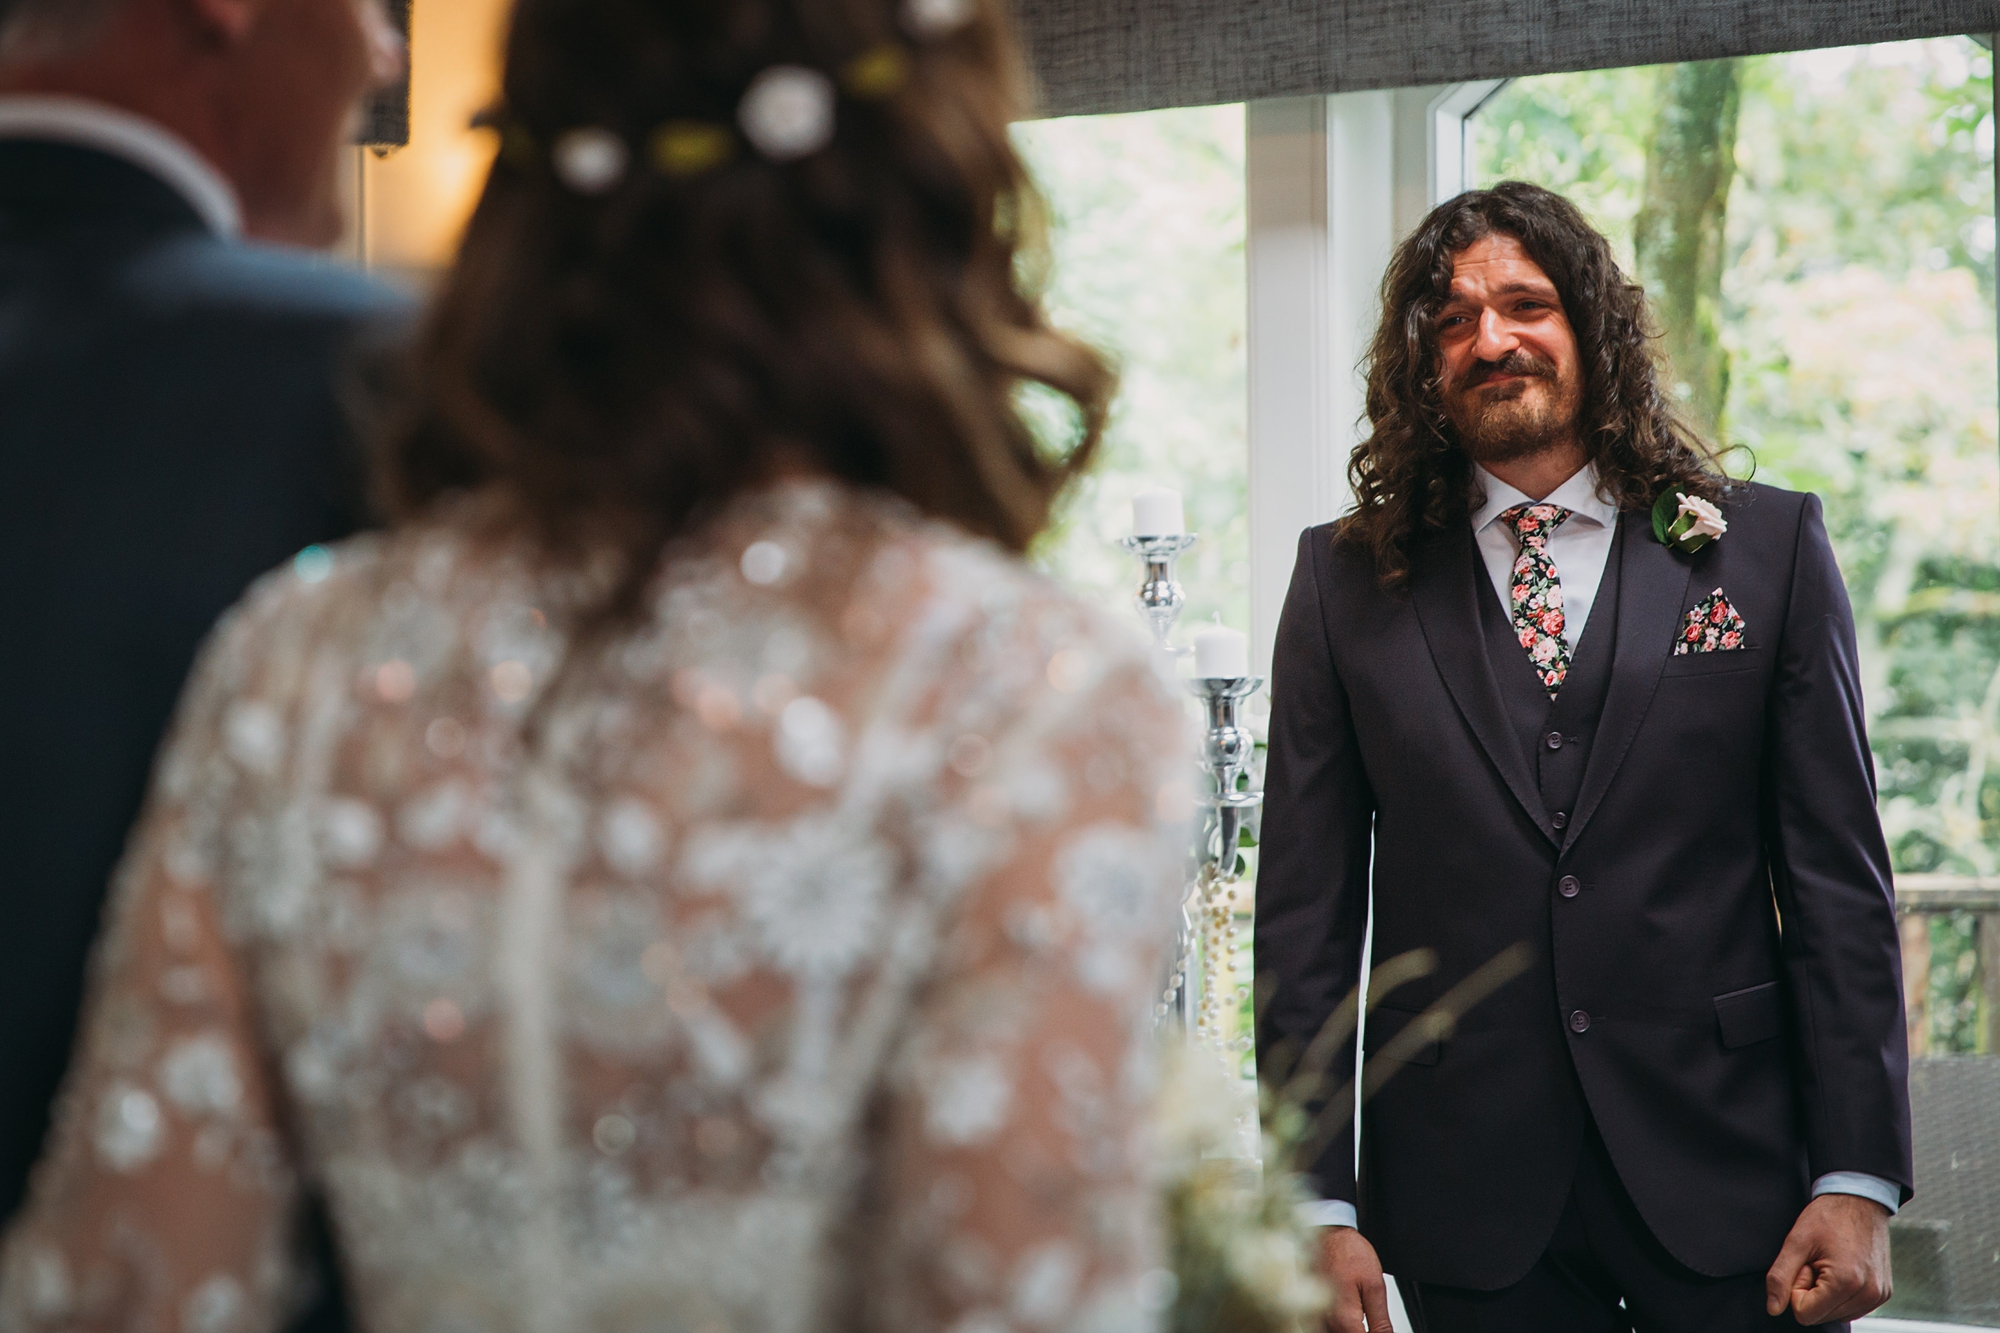 A groom sees his wife for the first time, best wedding photographs